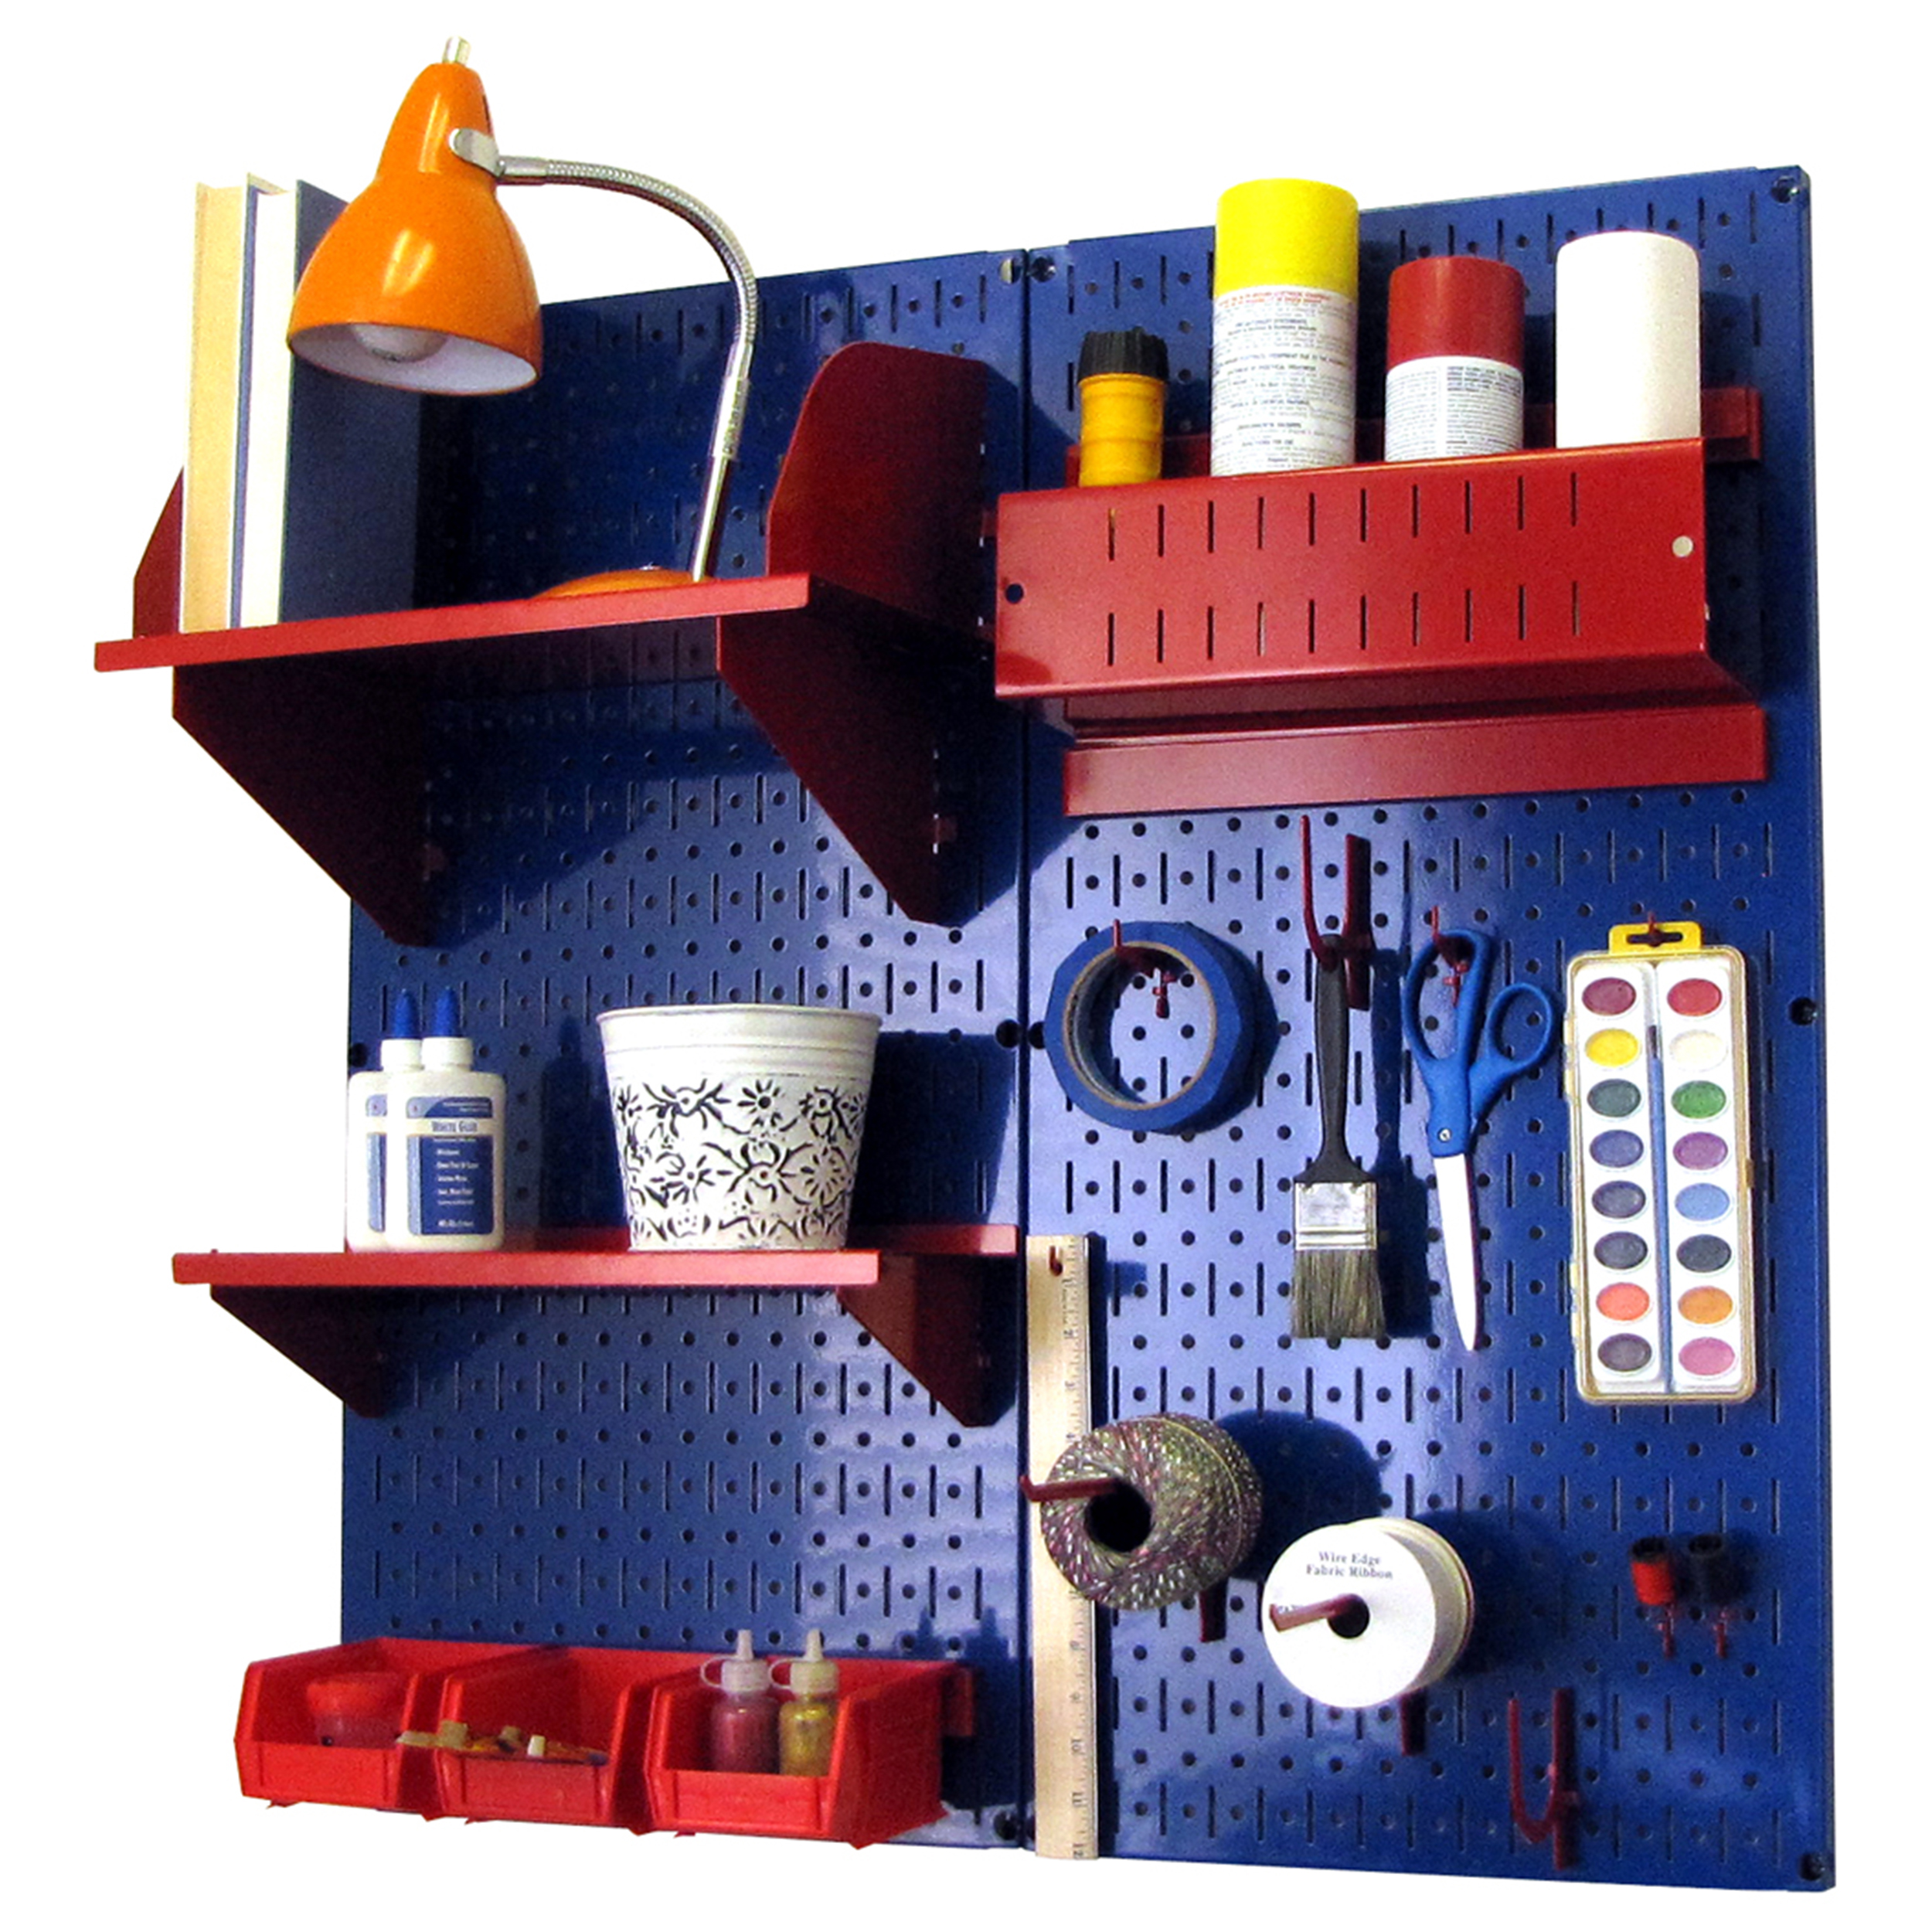 Pegboard Hobby Craft Pegboard Organizer Storage Kit With Blue Pegboard And Red Accessories